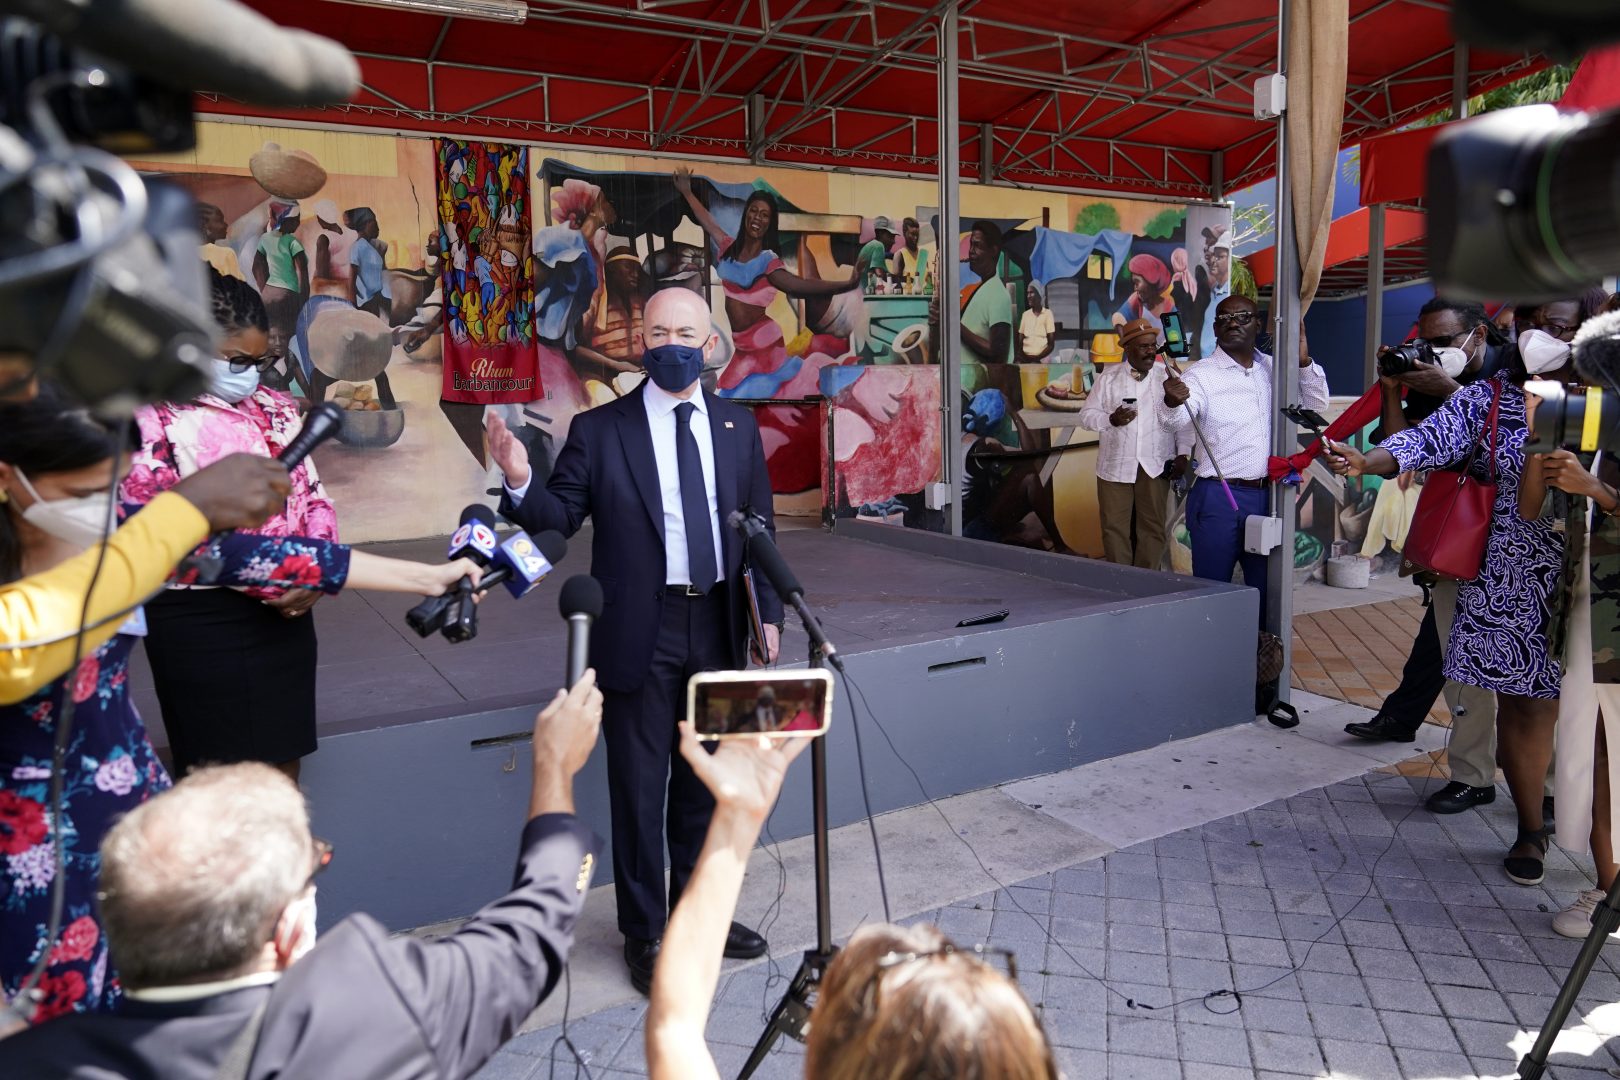 Secretary of Homeland Security Alejandro Mayorkas speaks with the news media outside of the Little Haiti Cultural Center, Tuesday, May 25, 2021, in Miami. Mayorkas met with community leaders following the announcement of a new 18-month designation for Haiti for Temporary Protected Status (TPS). (AP Photo/Lynne Sladky)